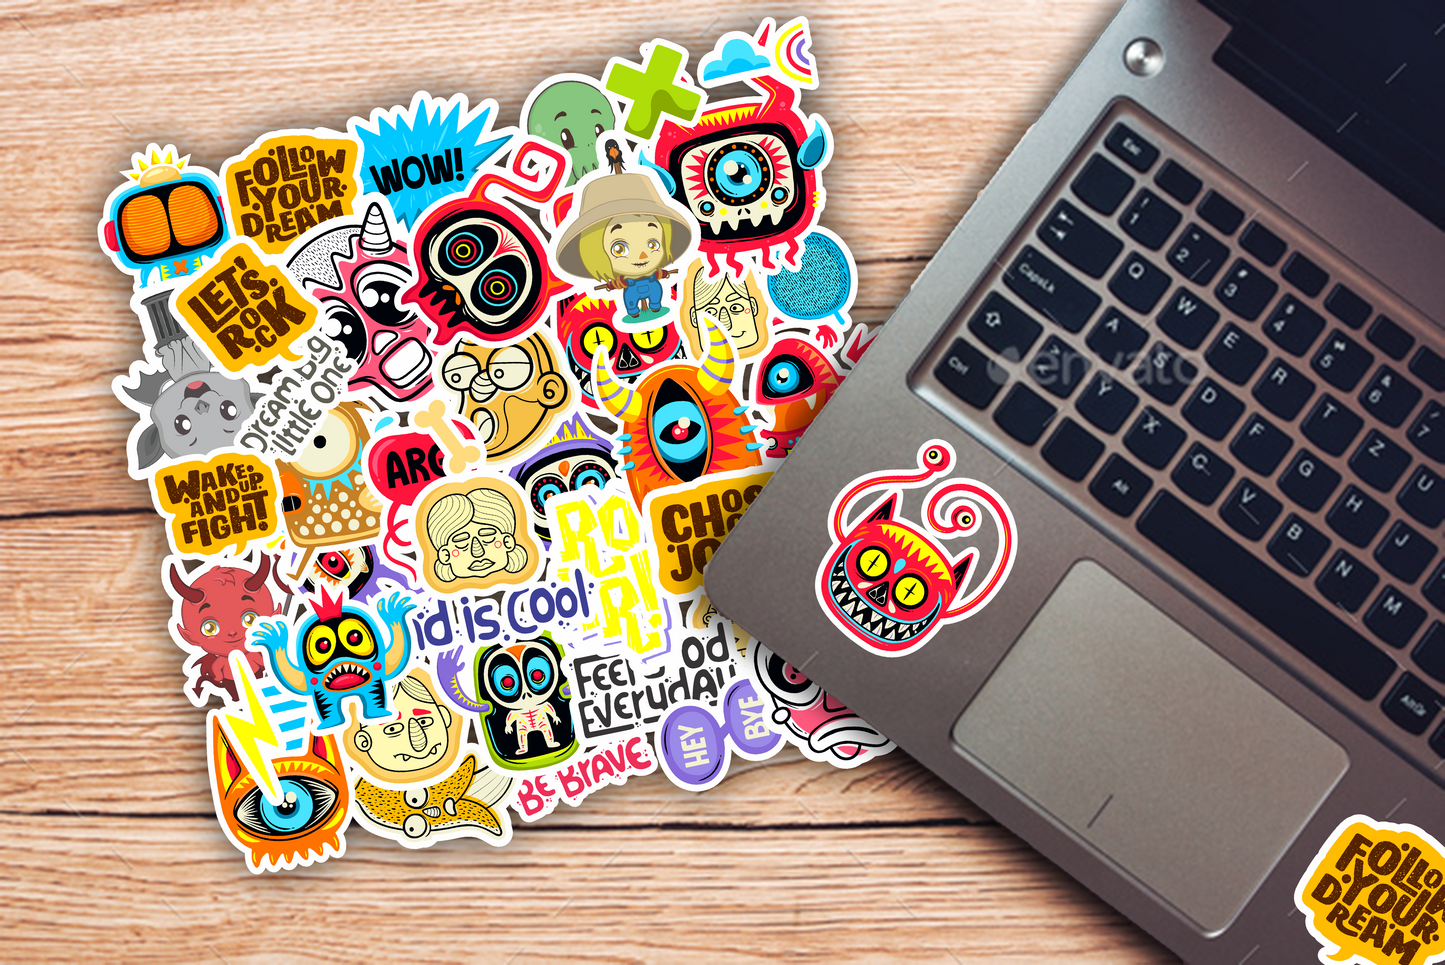 iberry's 50 pcs Stickers for Laptop Mobile Phones Computer Bicycle Luggage Scrapbooks Gadgets | Waterproof Stickers|Monster Collection Stickers| Laptop Sticker- Set of 50 Stickers (03)